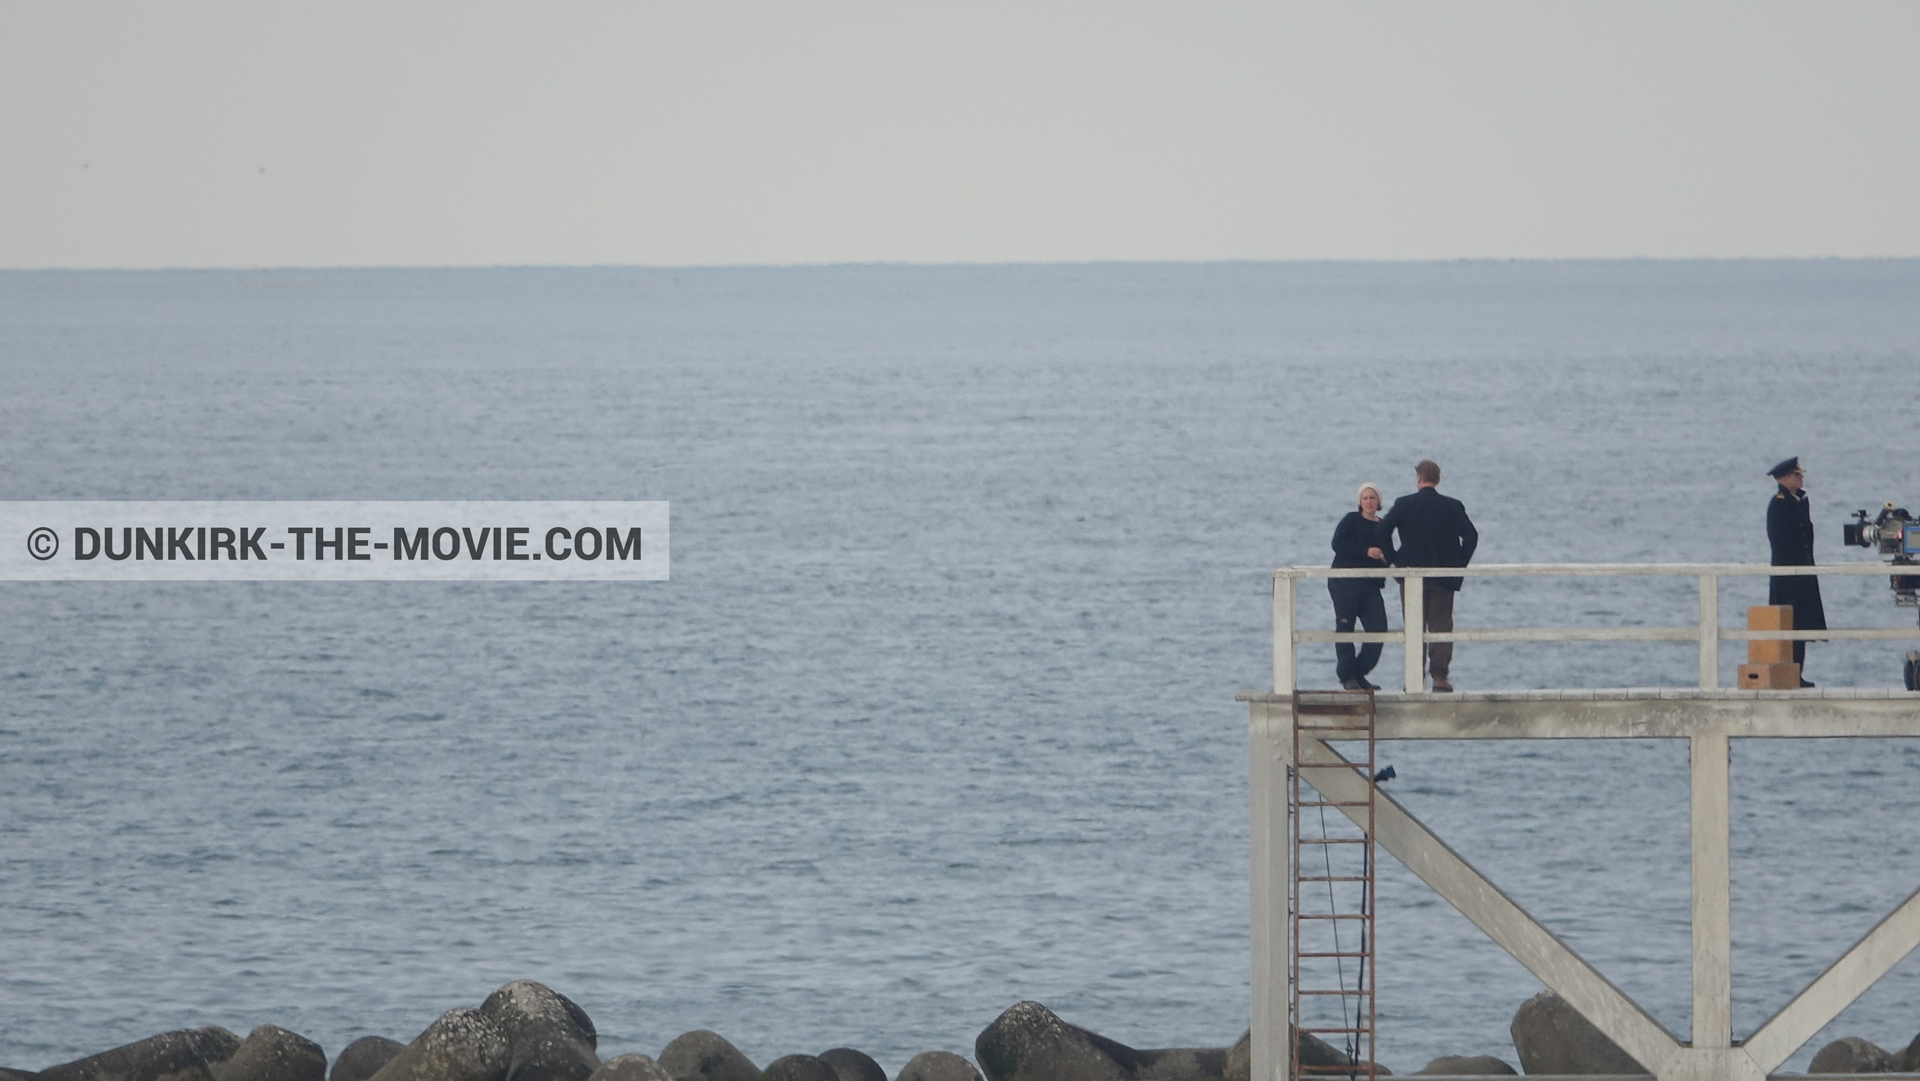 Picture with actor, IMAX camera, EST pier, Christopher Nolan, Emma Thomas,  from behind the scene of the Dunkirk movie by Nolan